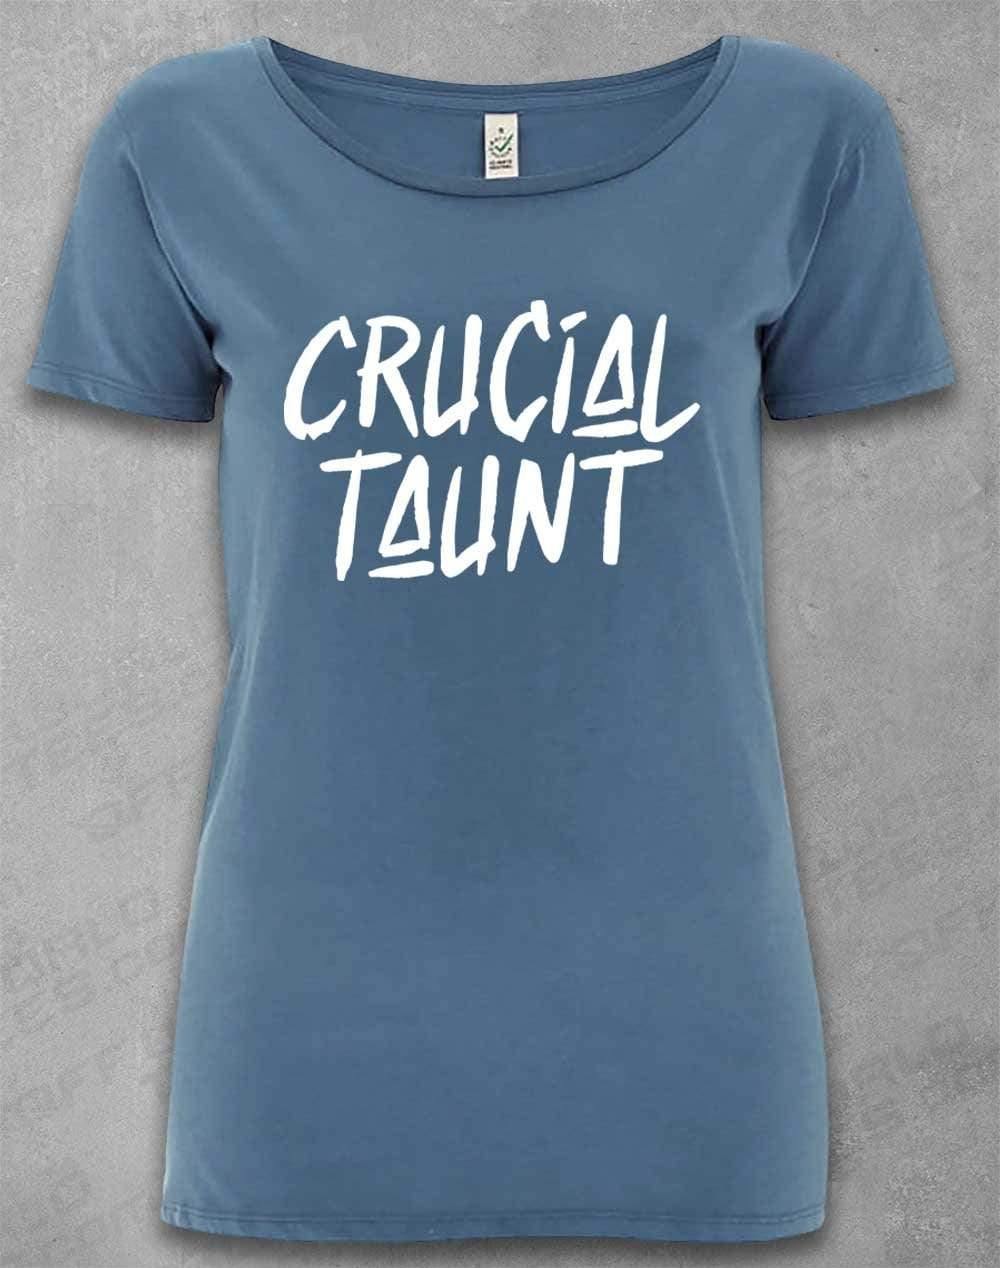 DELUXE Crucial Taunt Organic Scoop Neck T-Shirt 8-10 / Faded Denim  - Off World Tees